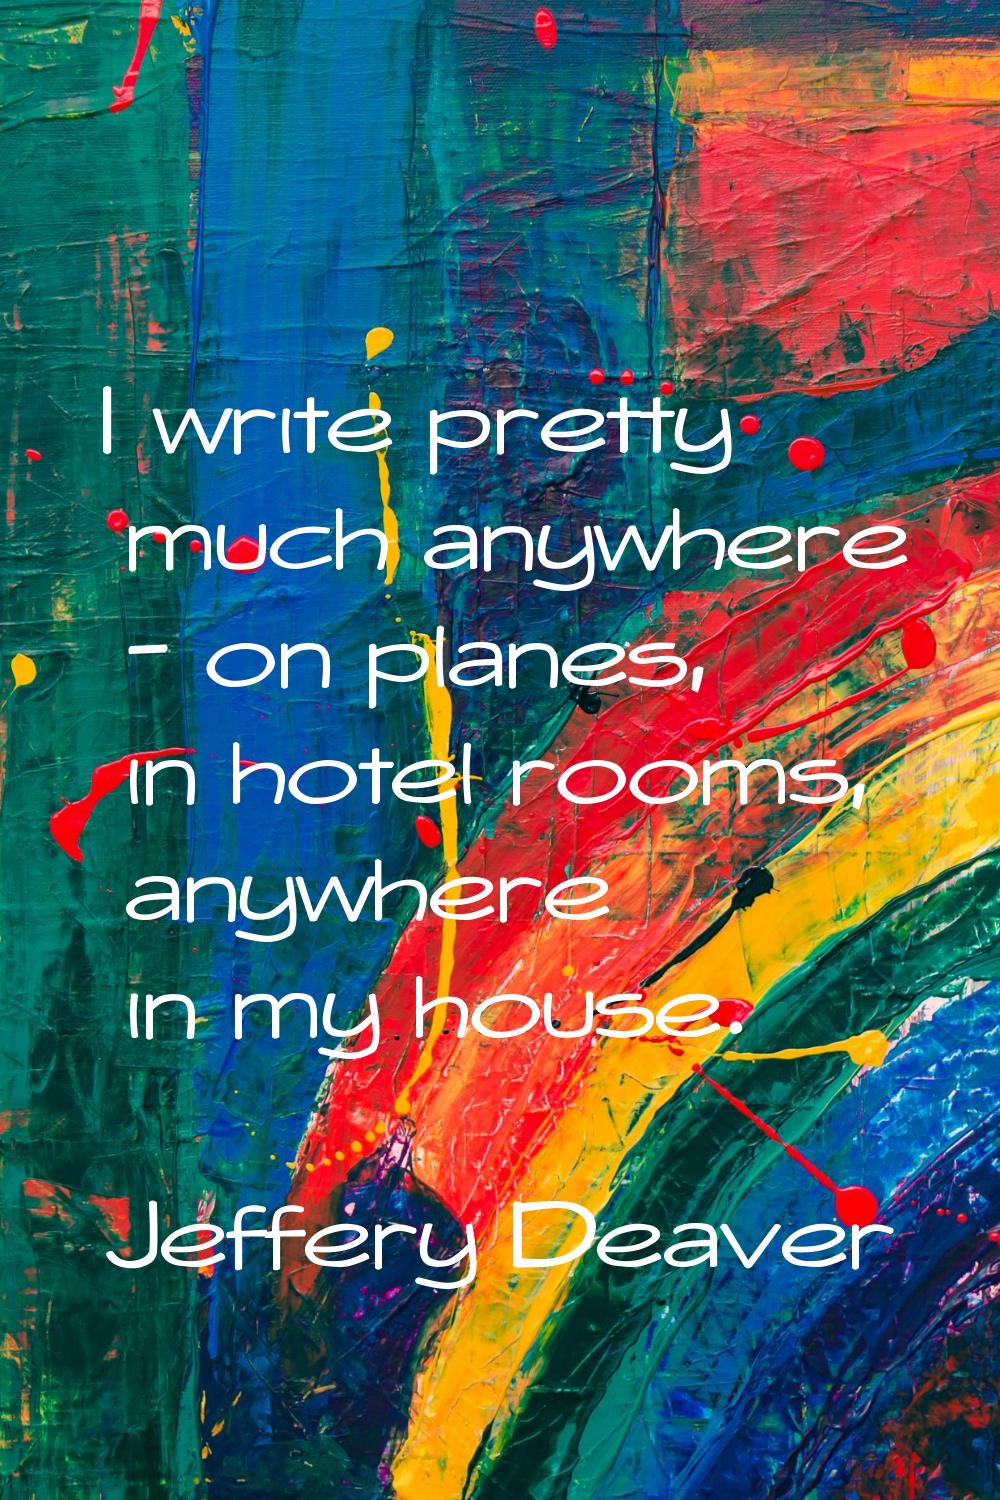 I write pretty much anywhere - on planes, in hotel rooms, anywhere in my house.